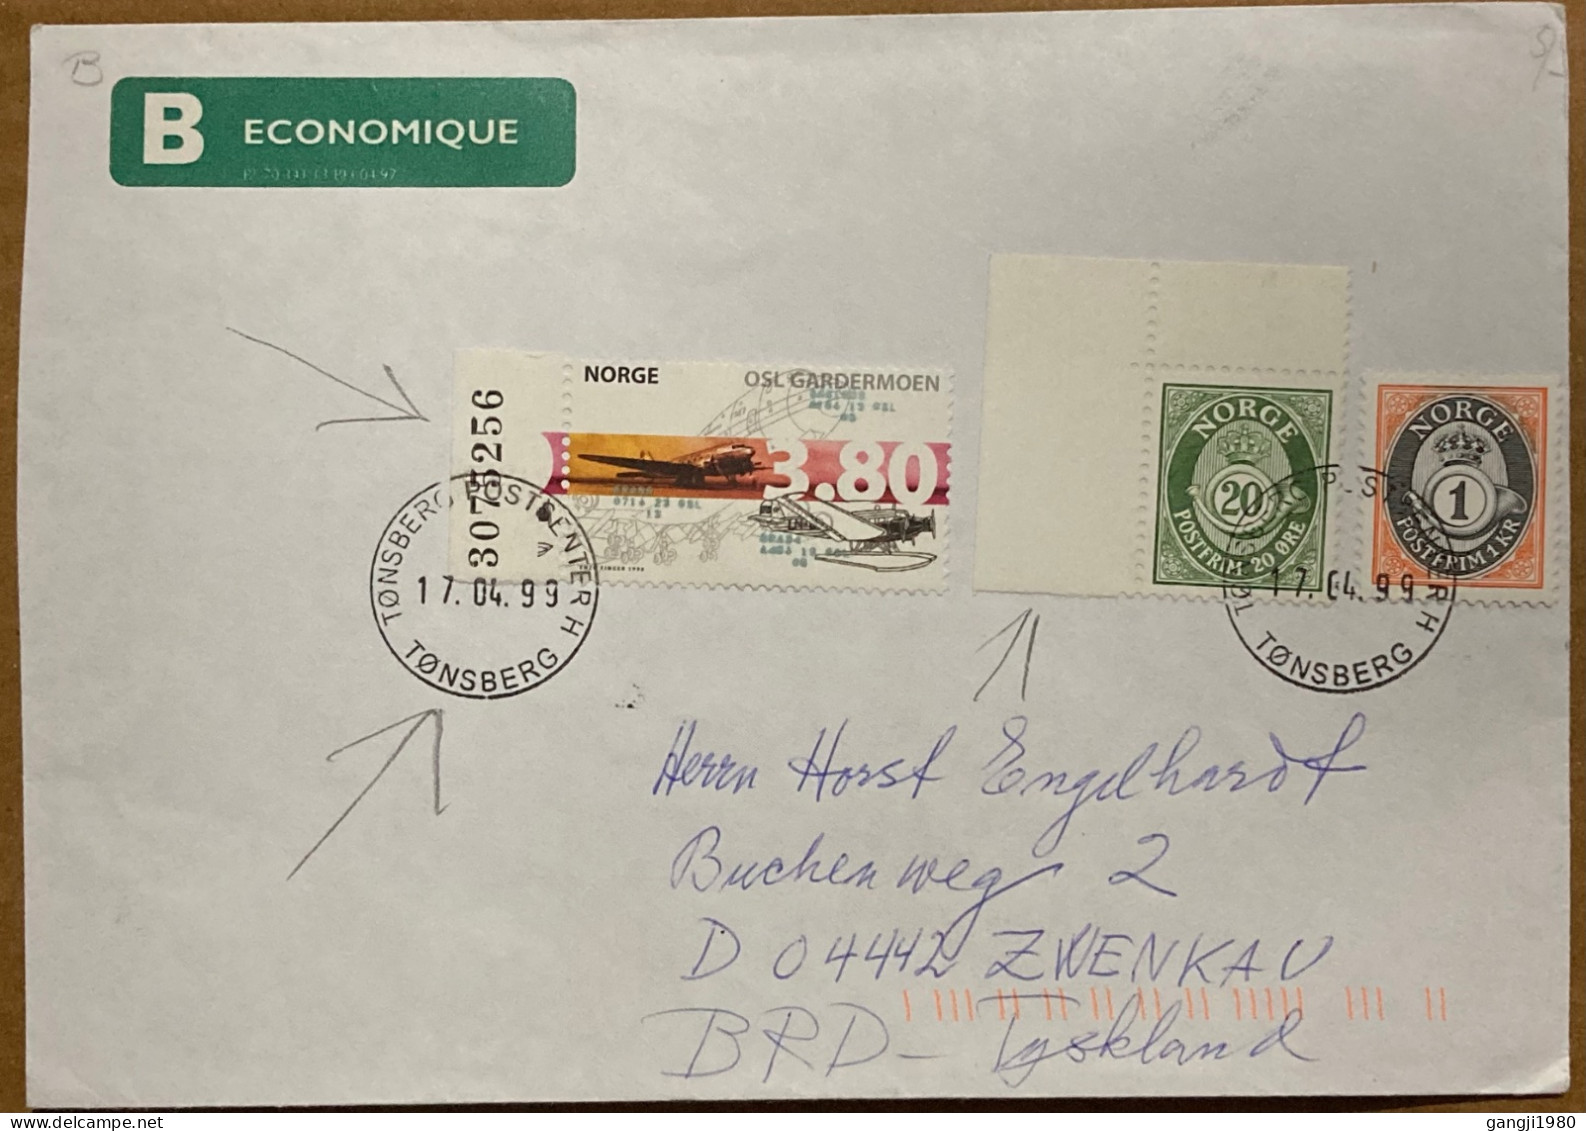 NORWAY 1999, COVER USED GERMANY, 3 DIFF STAMP, POST HORN,  OSLO AIRPORT, PLATE NUMBER, TONSBERG CITY CANCEL - Covers & Documents